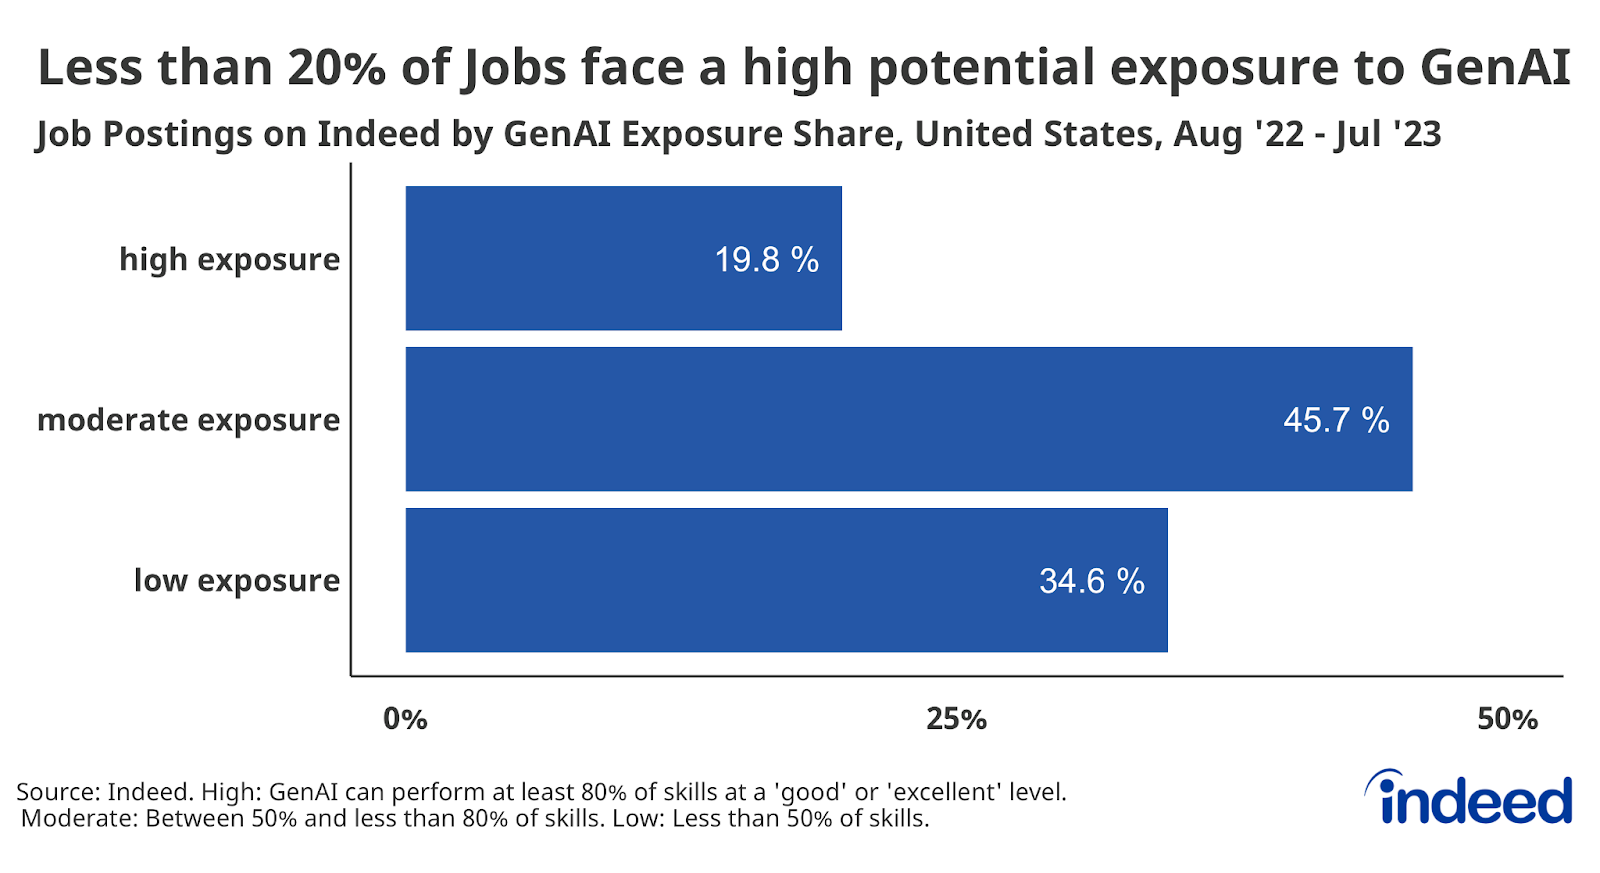 Bar graph titled "Less than 20% of Jobs face a high potential exposure to GenAI," shows the Job Postings on Indeed by GenAI Exposure Share, from August '22 – July '23. High exposure accounted for 19.8%, while moderate exposure (45.7%) and low exposure (34.6%) accounted for more of the overall job postings during this period.